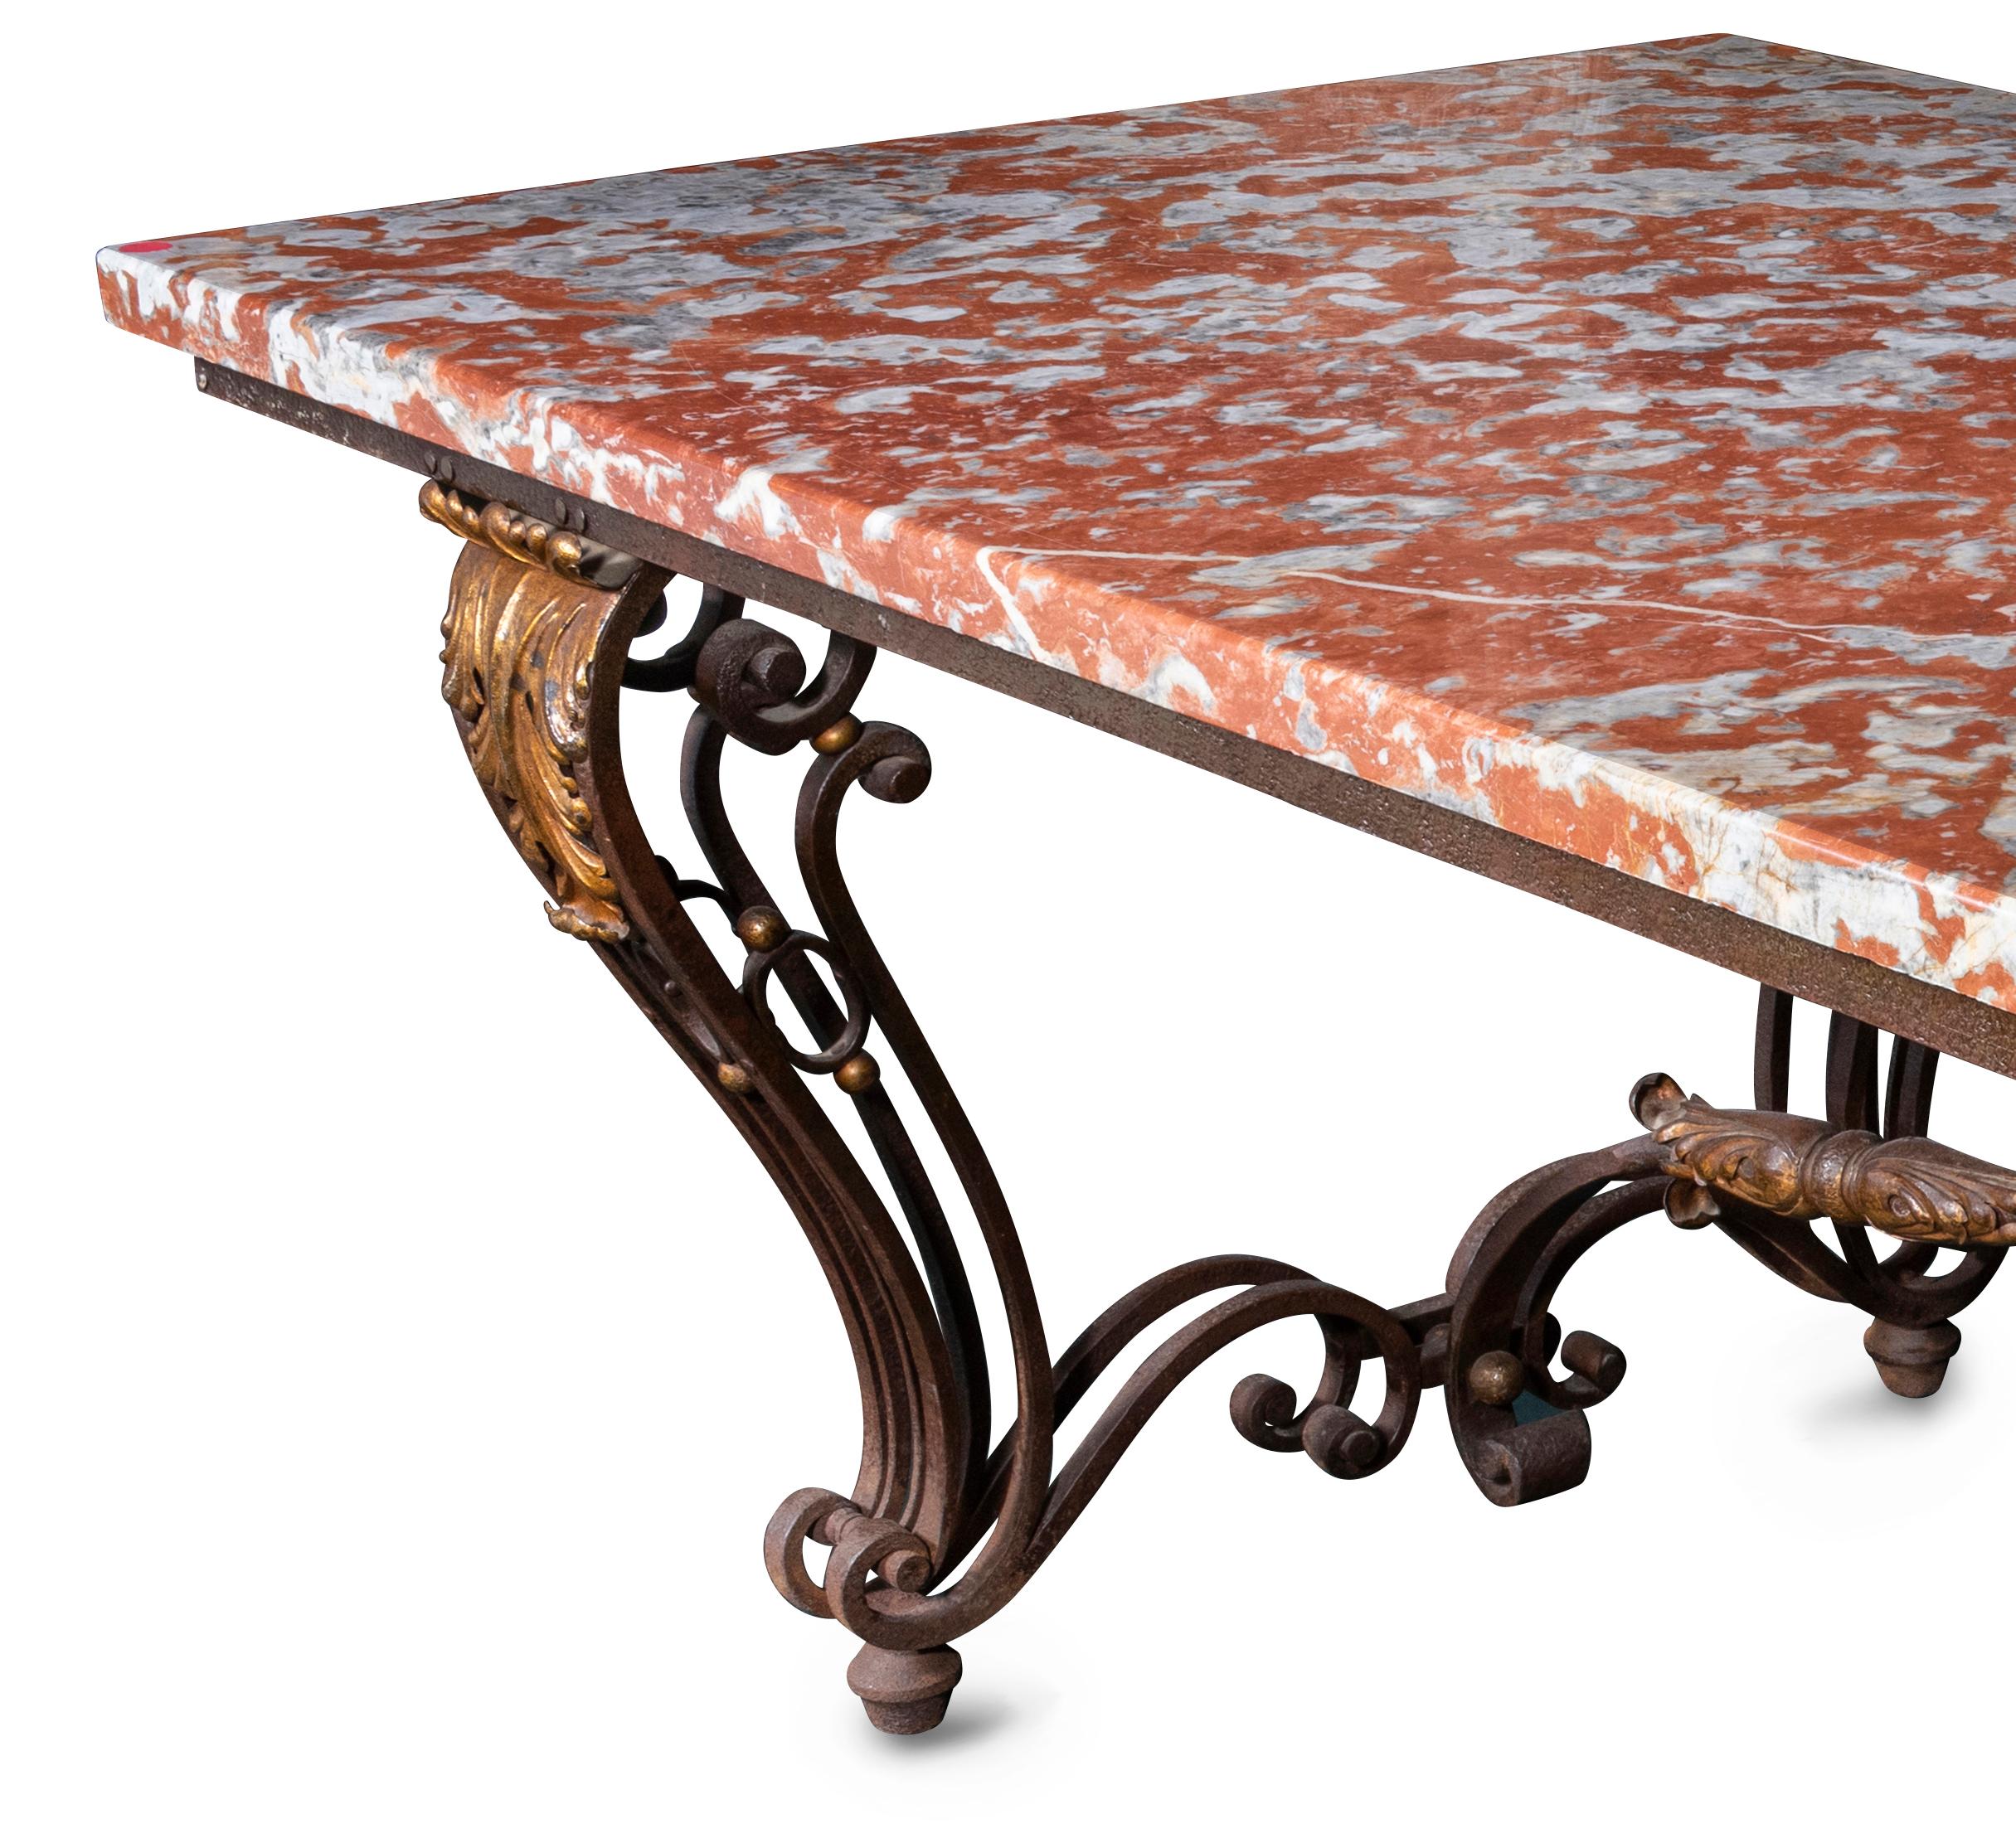 The orange et gris marble top over wrought iron base with pair of cabriole scroll legs, each with gilt anthemion capital and double s-scroll stretchers joined by a central pair of cross s-scroll irons, each with conforming gilt metal anthemion. The